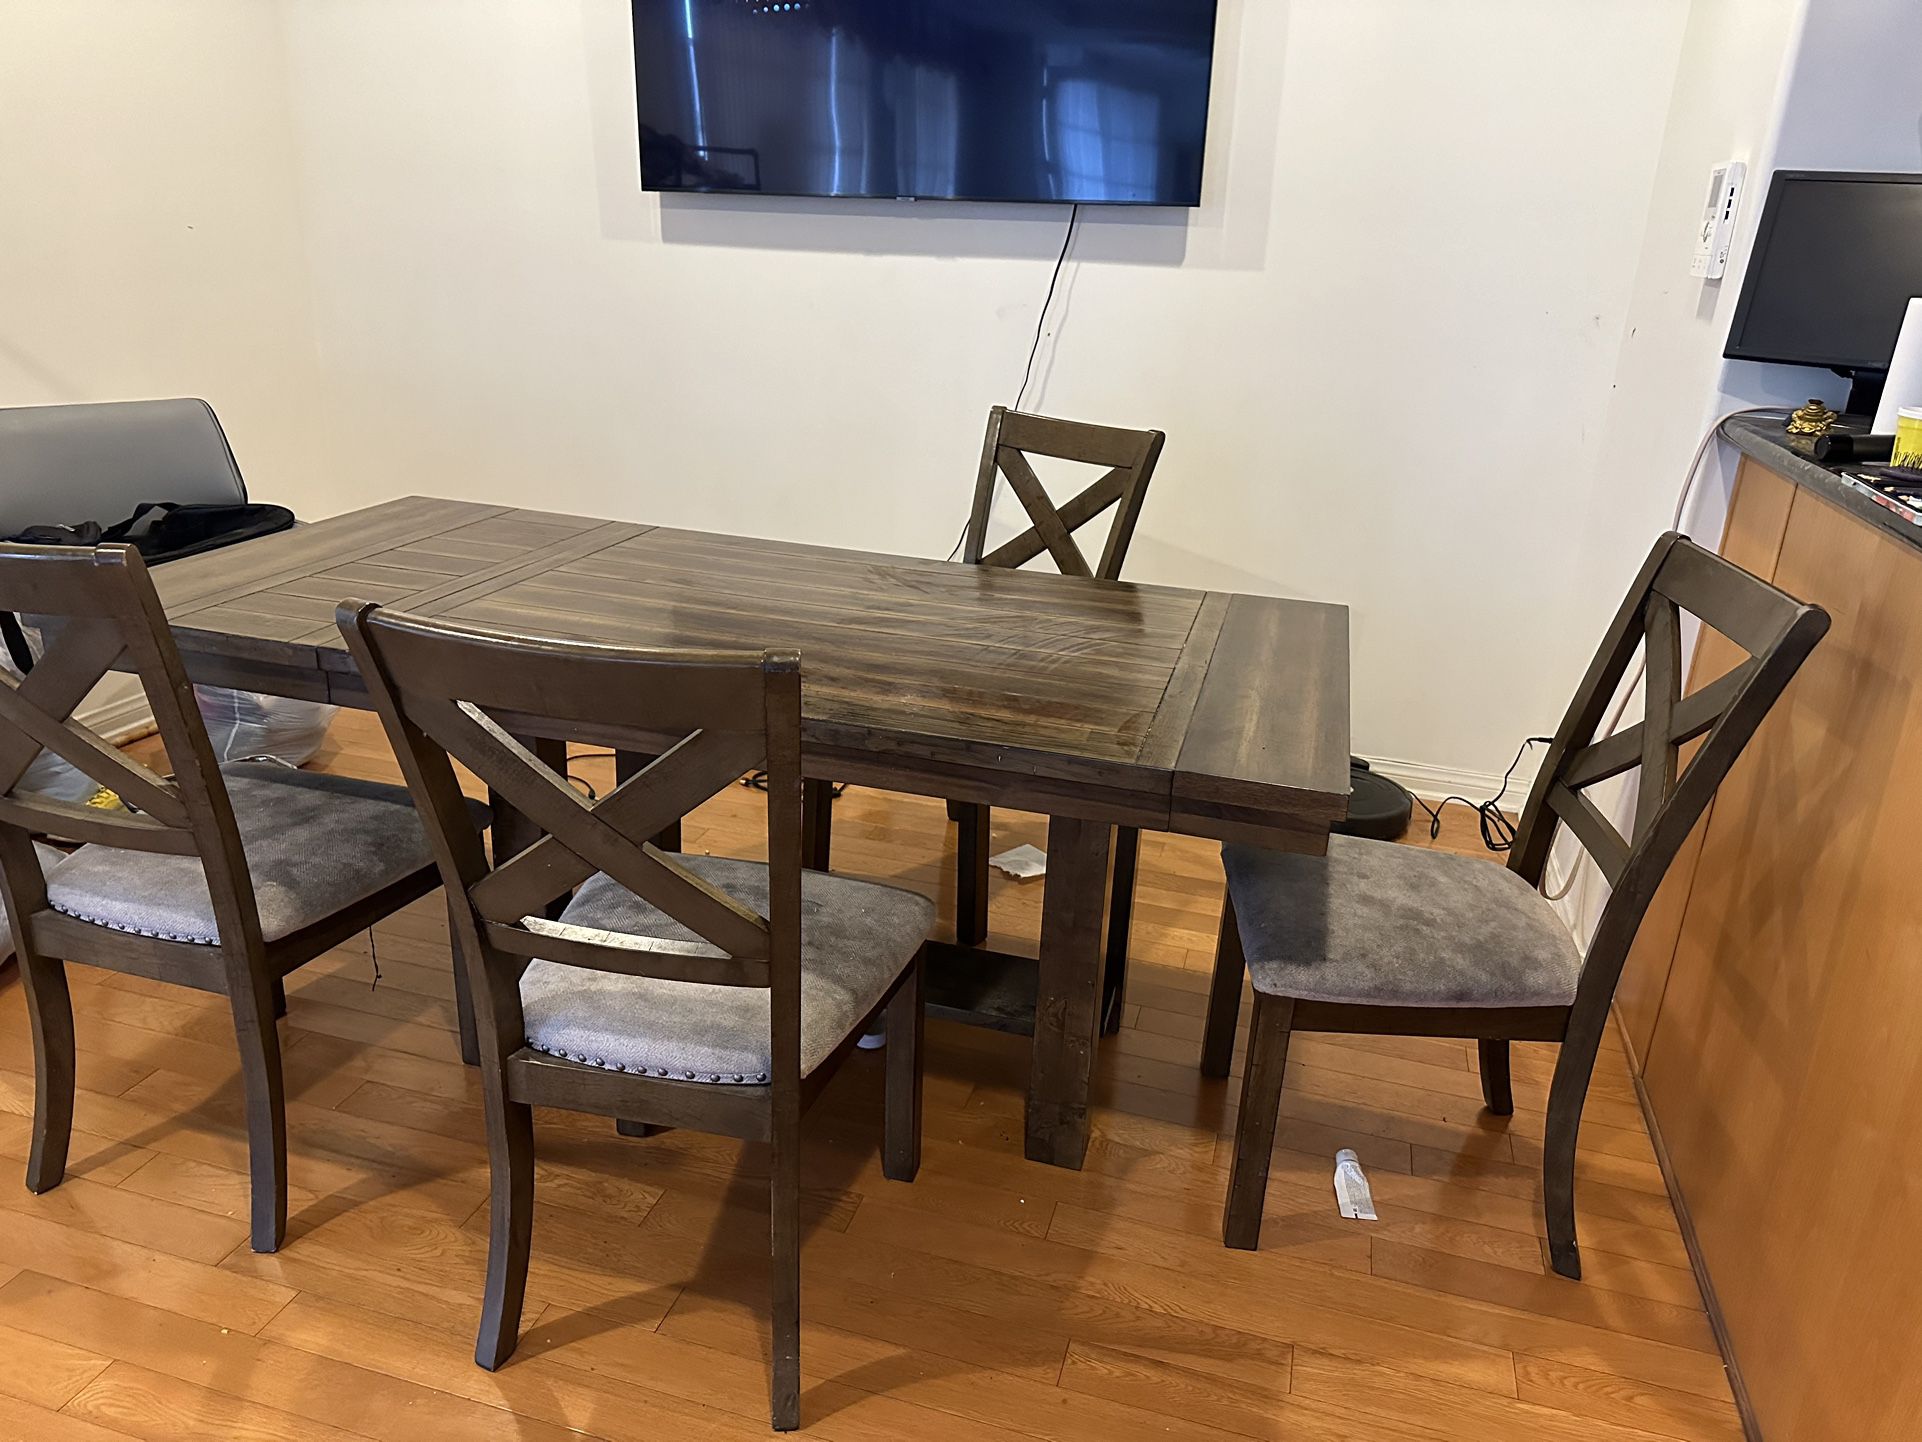 Solid Wood Table With Extension and 4 Chairs